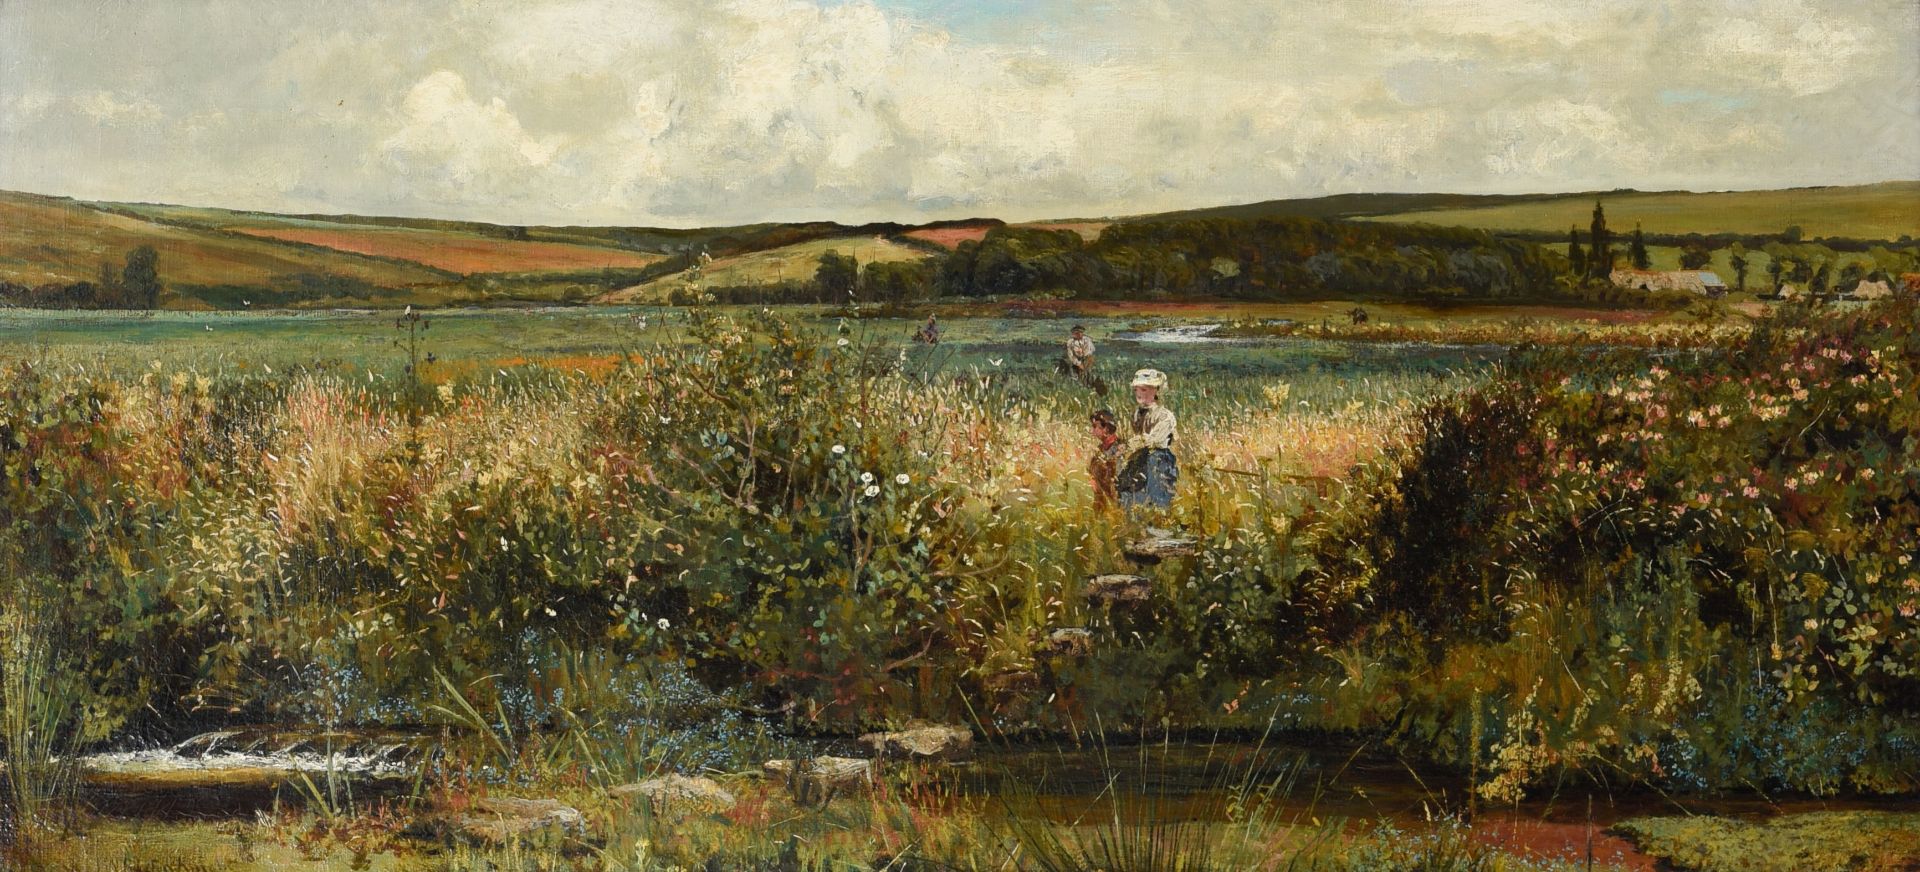 John William Buxton Knight (1842-1908), pastoral figures in a panorama, oil on canvas, 56 x 120 cm